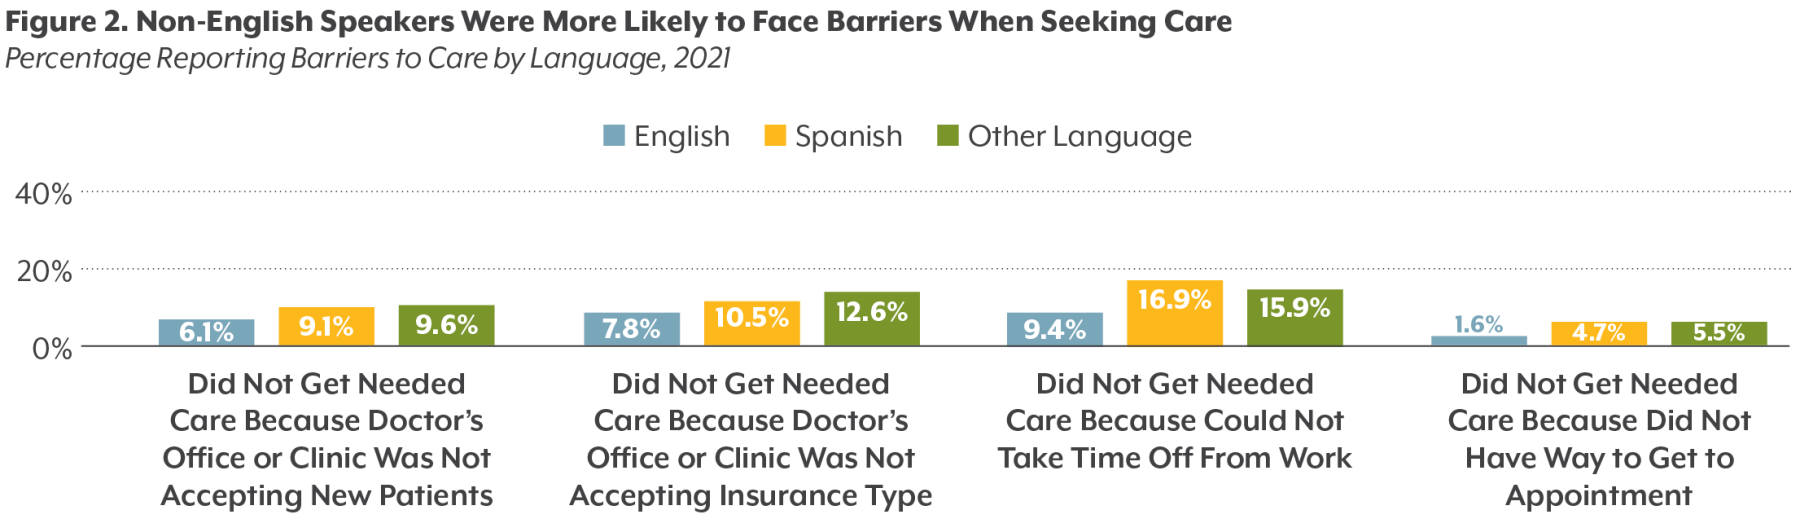 Non-English Speakers Were More Likely to Face Barriers When Seeking Care